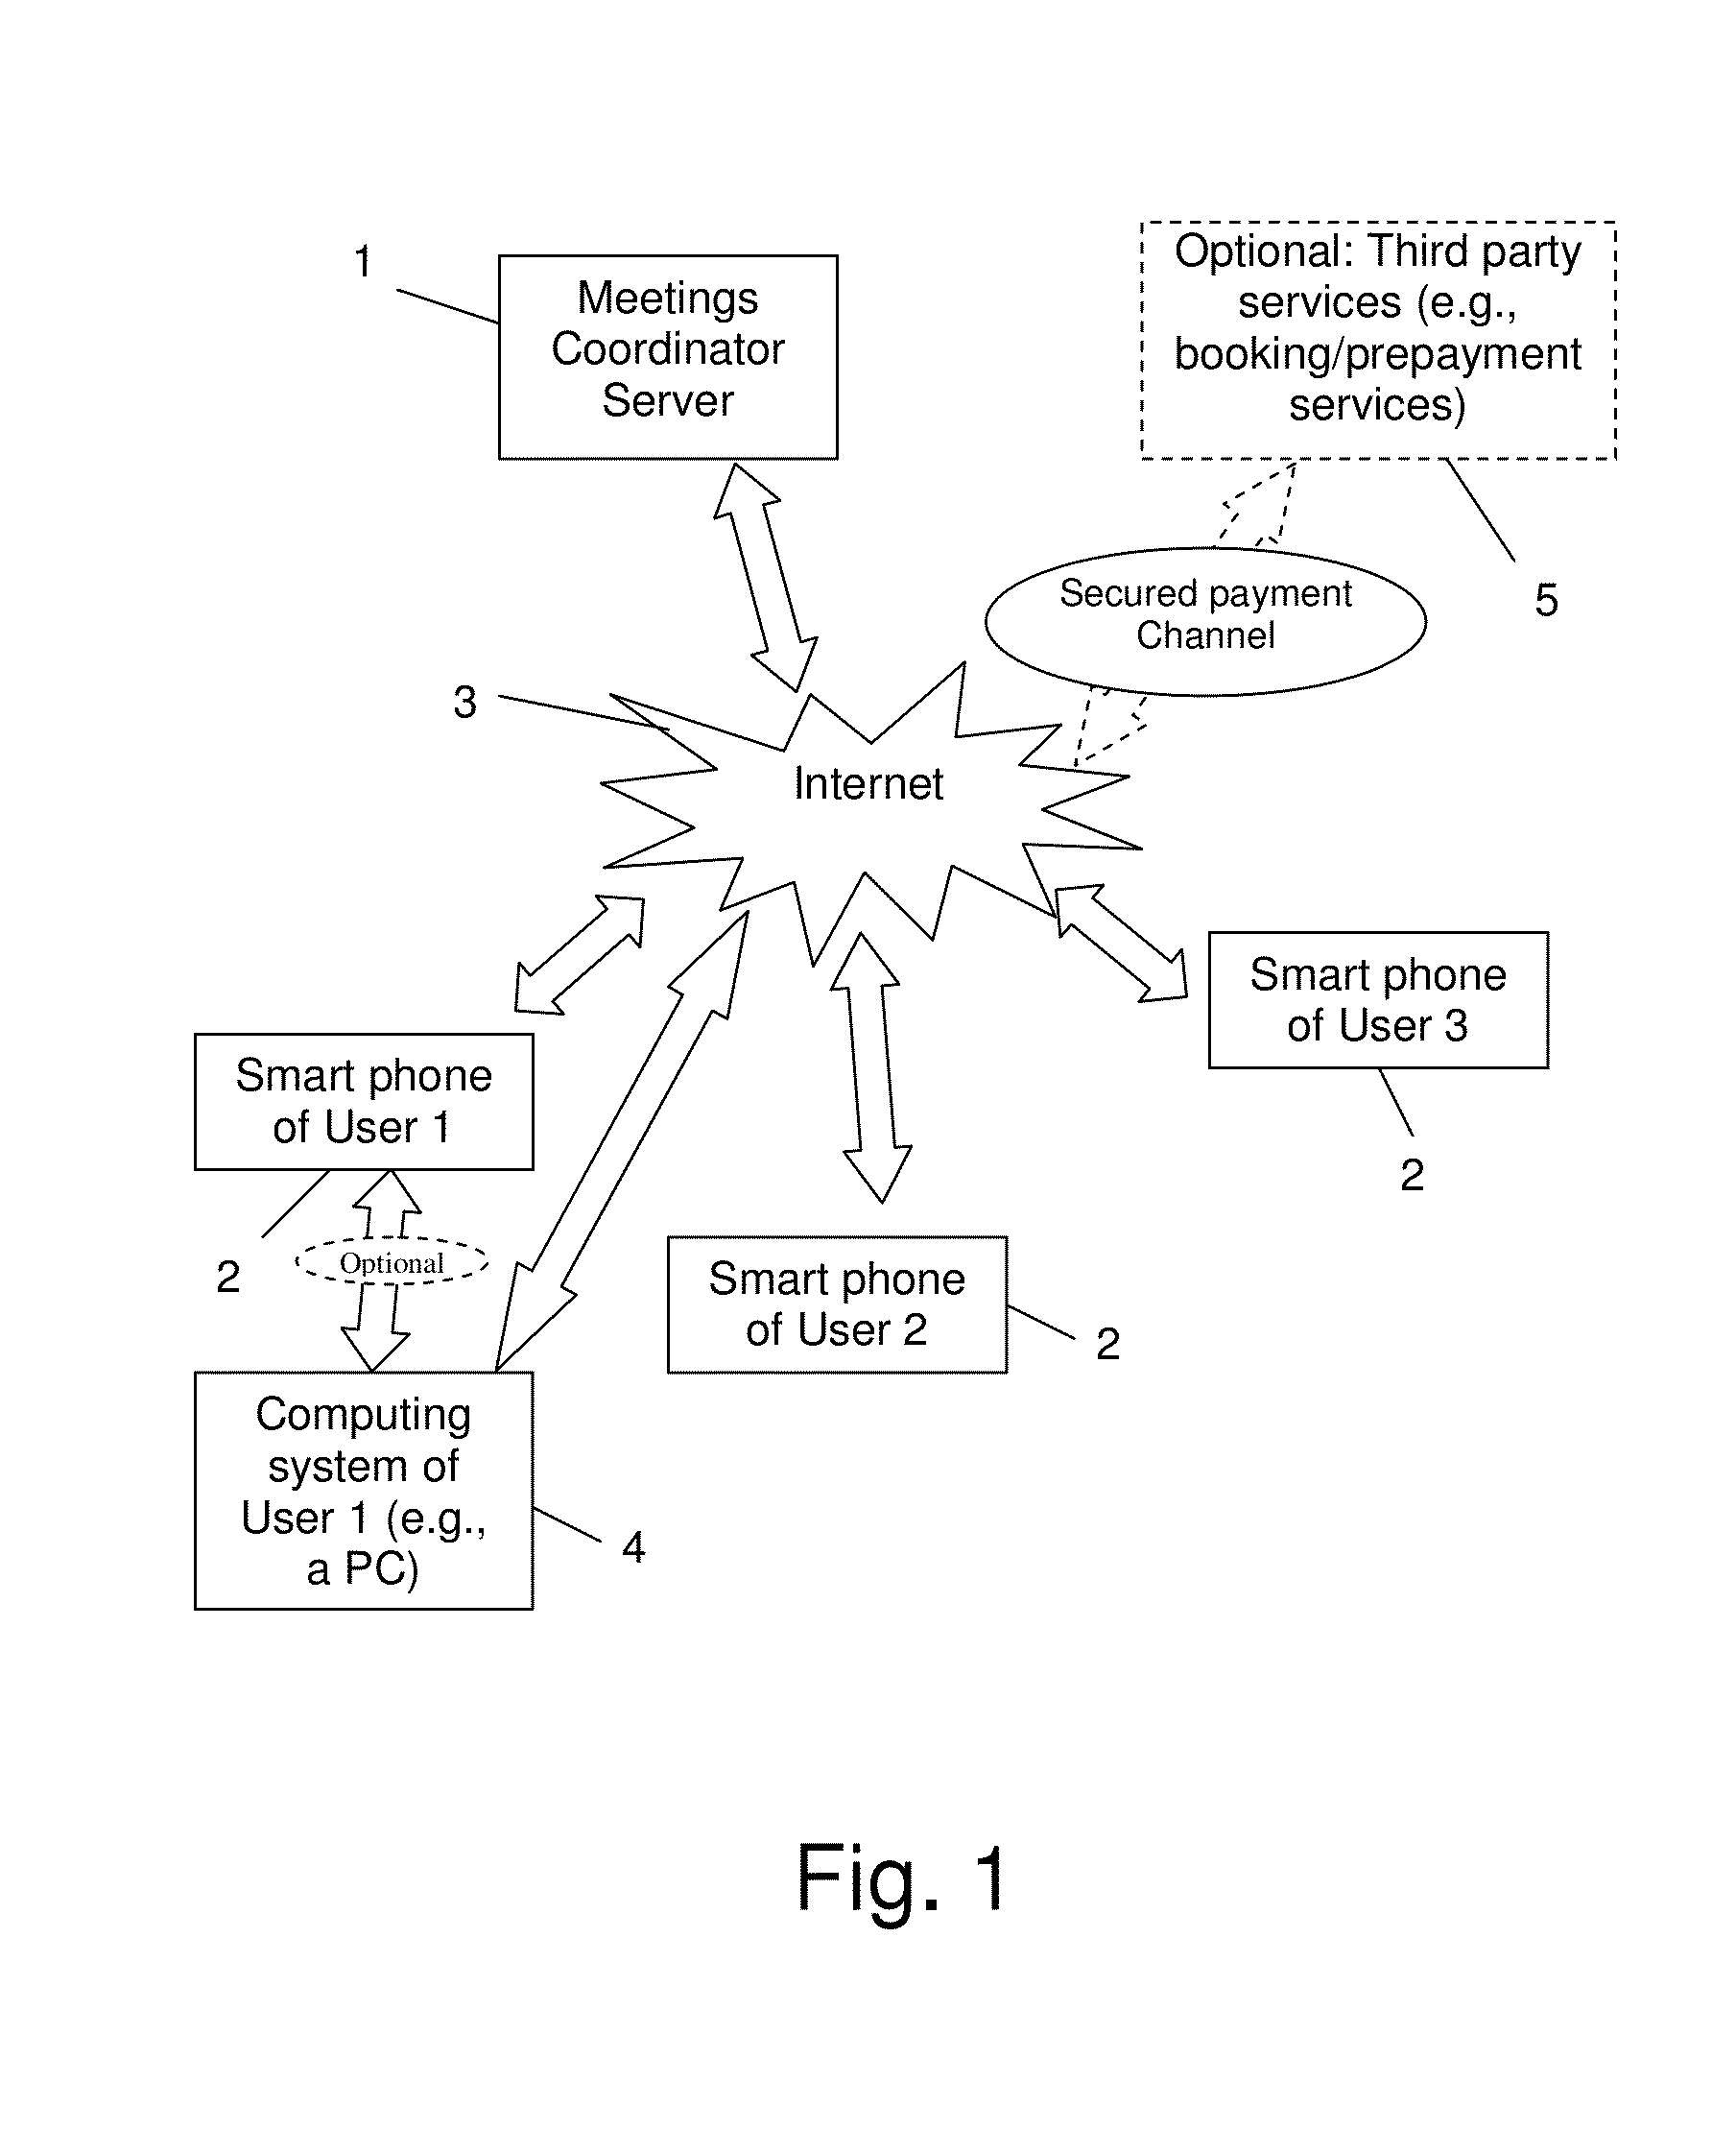 Meetings and Events Coordinating System and Method